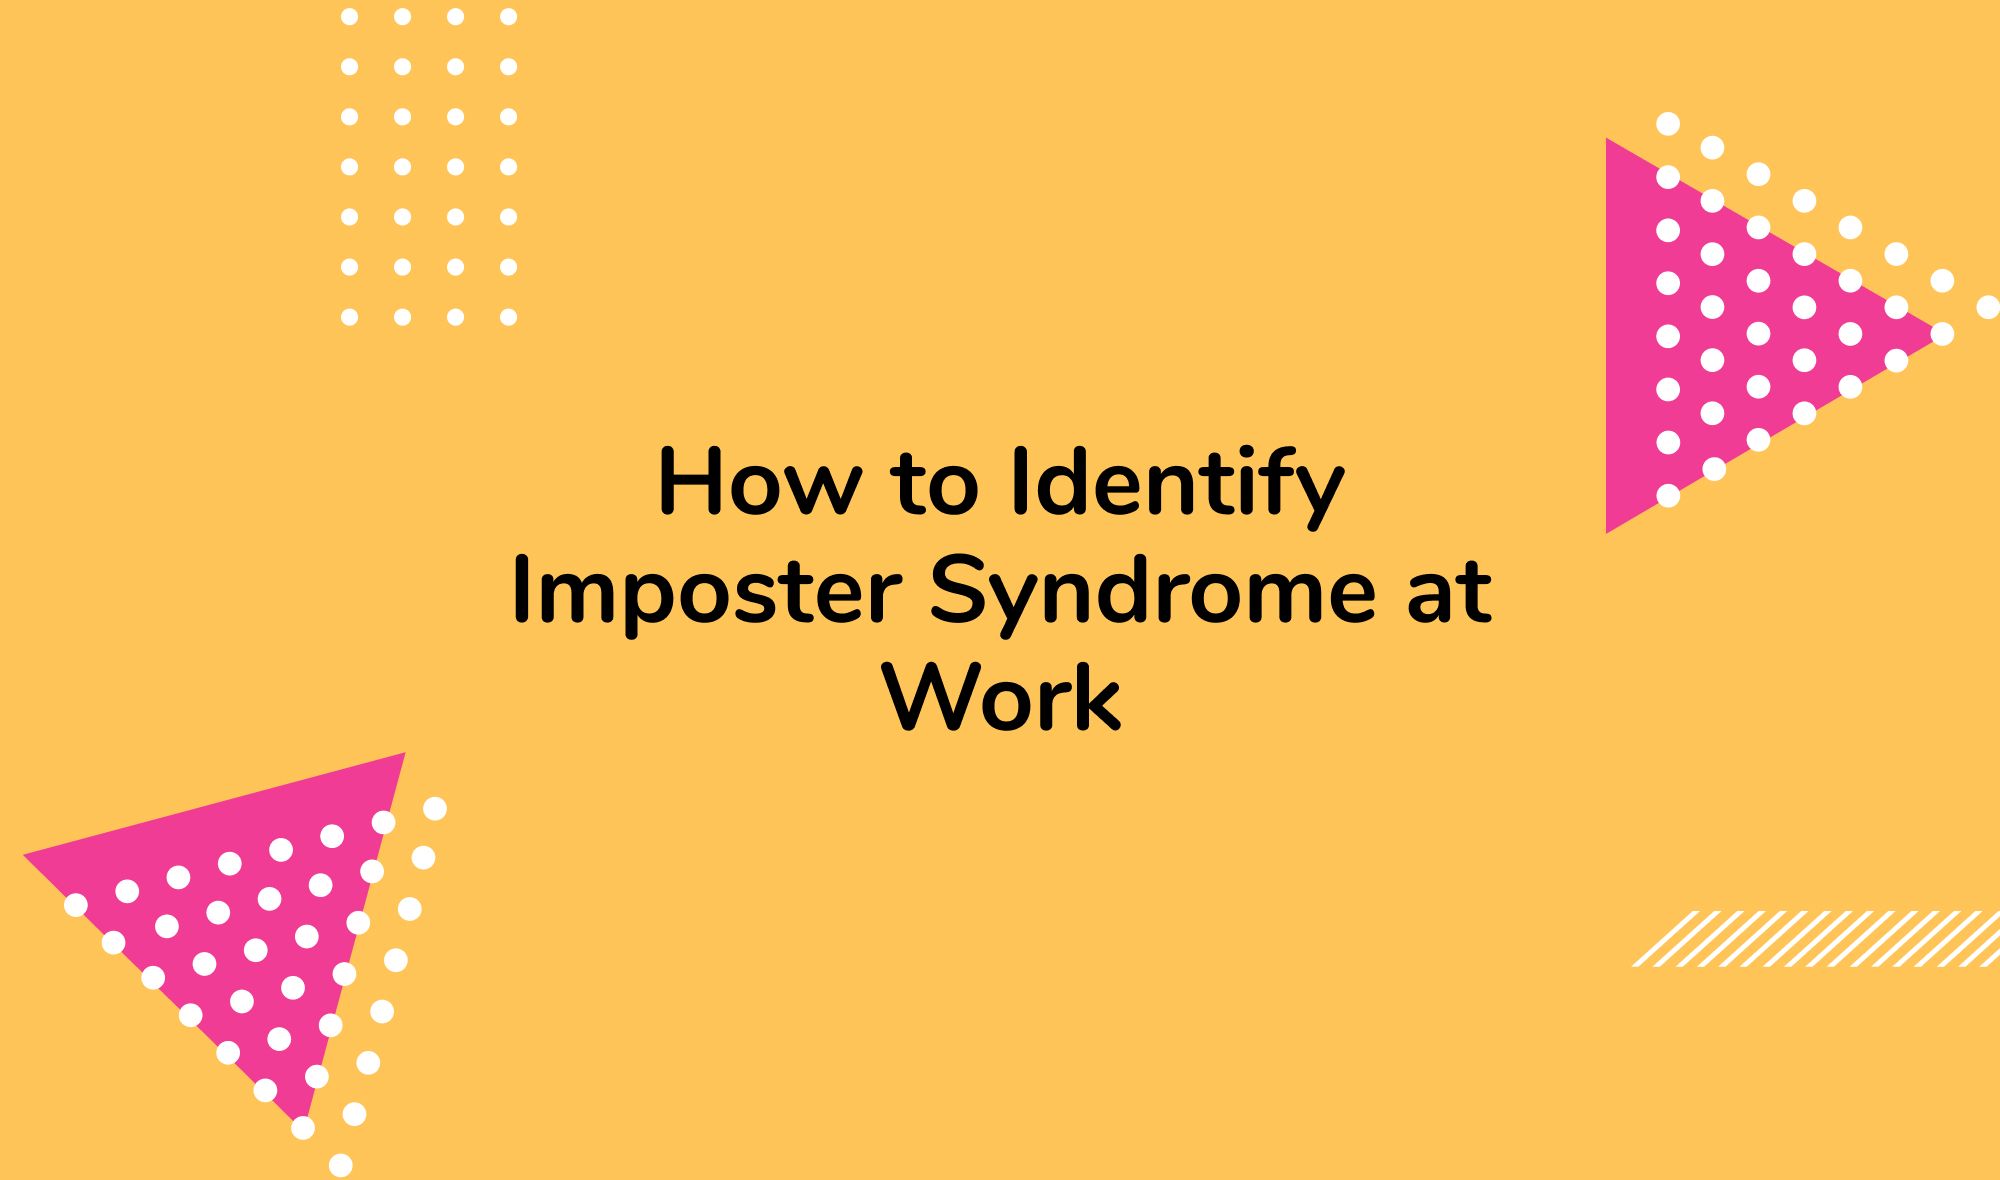 How to Identify Imposter Syndrome at Work